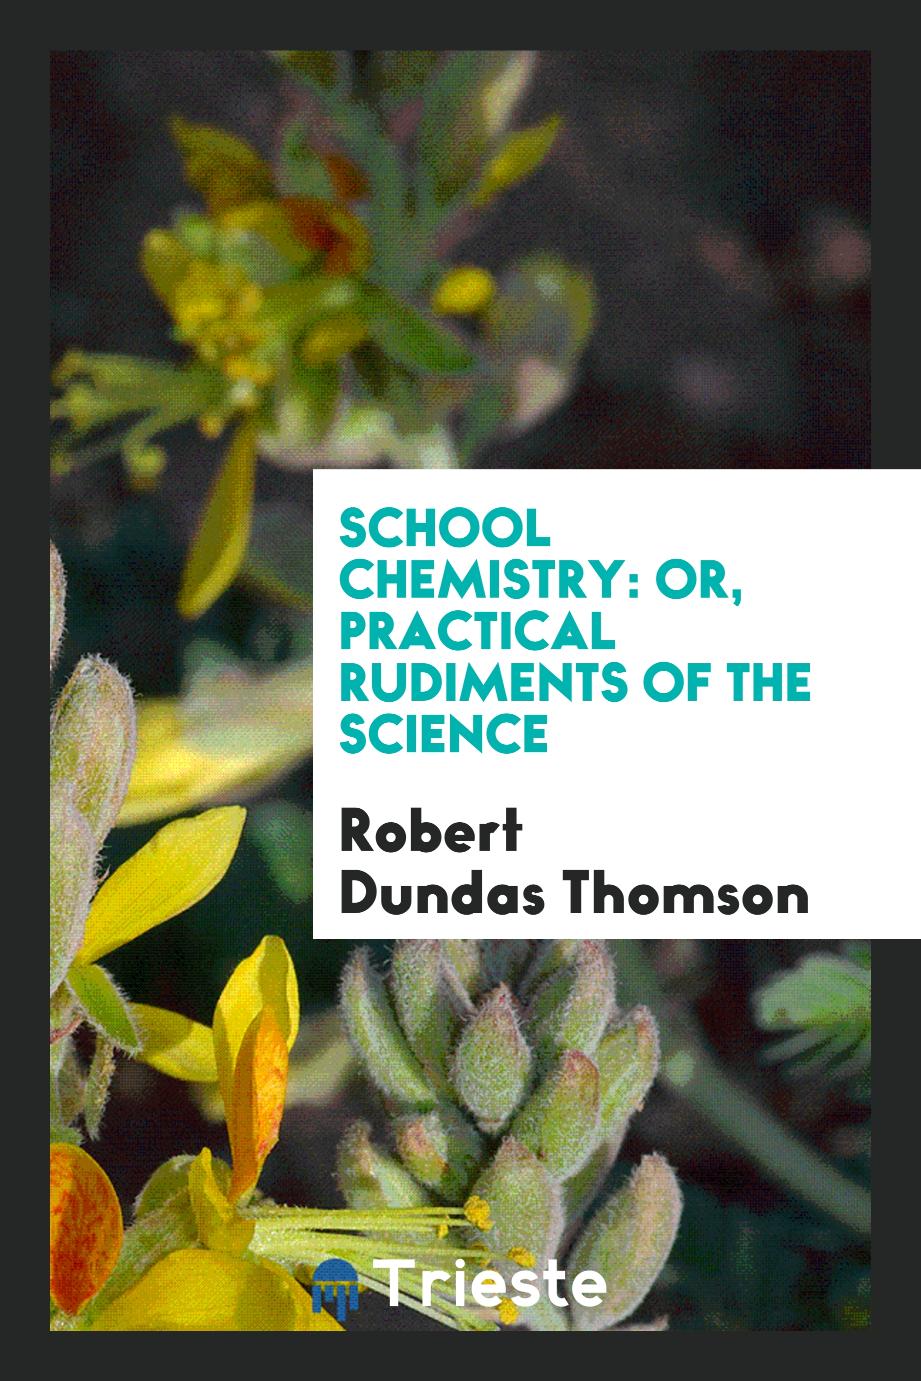 School Chemistry: Or, Practical Rudiments of the Science